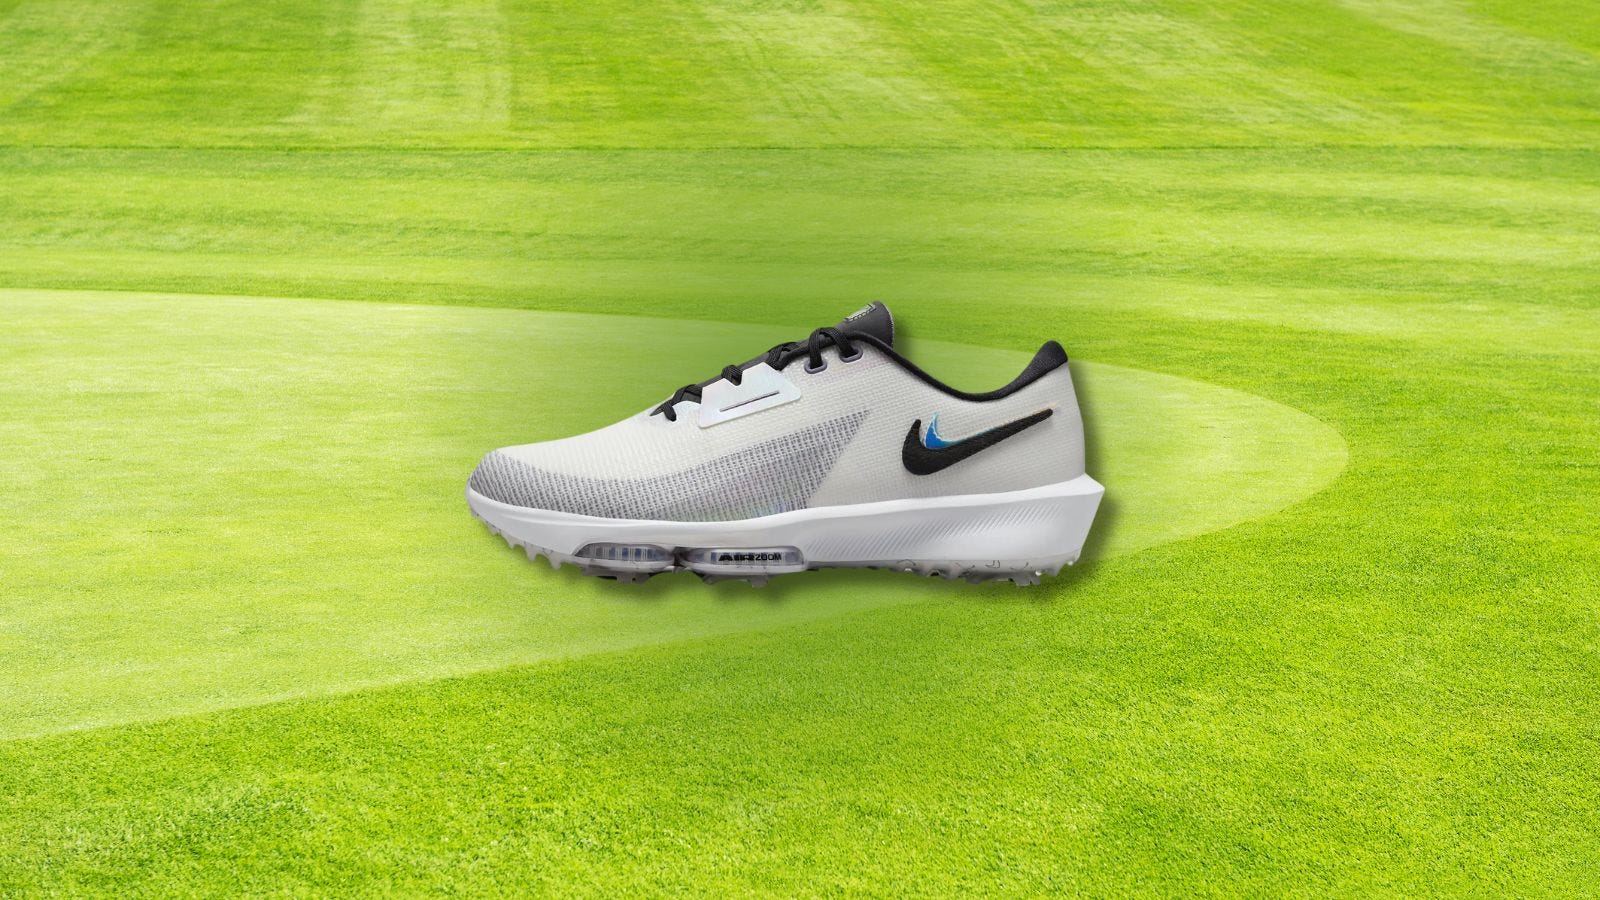 men's nike golf shoe set against a background of a golf green